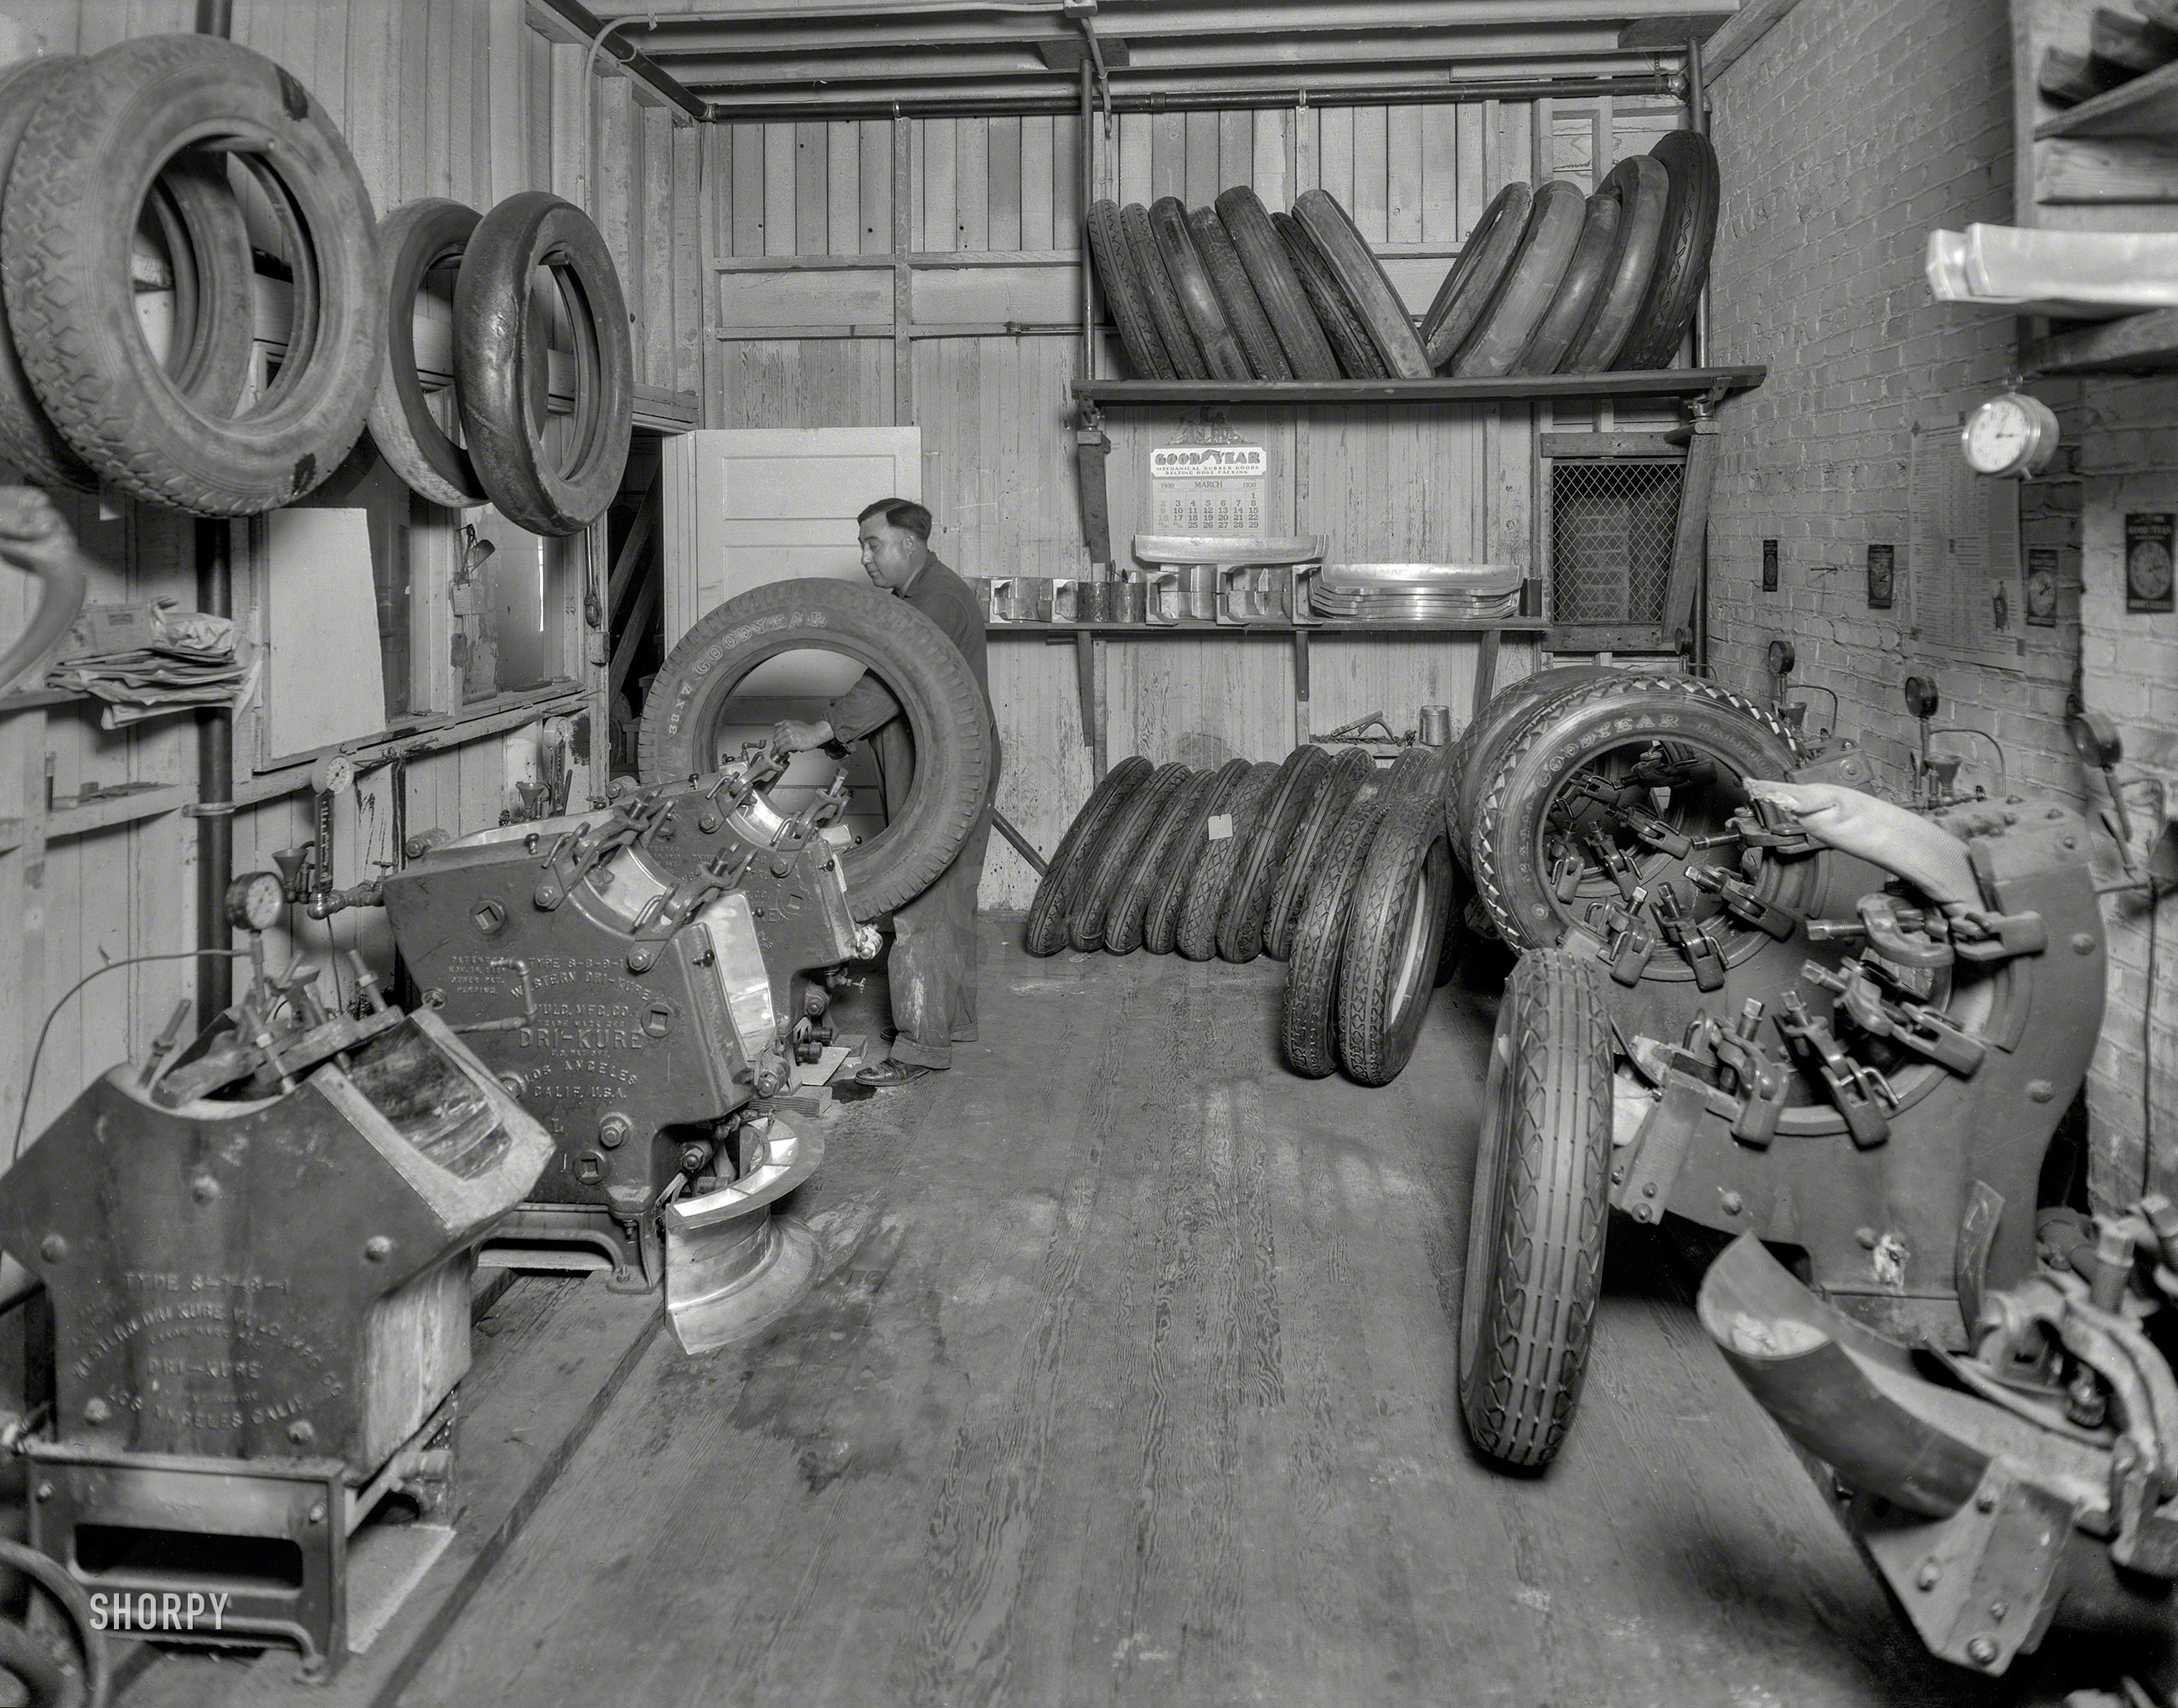 San Francisco in 1930. "Goodyear tire retreading." Equipment by Western Dri-Kure. Third photo in this series. 8x10 nitrate negative. View full size.